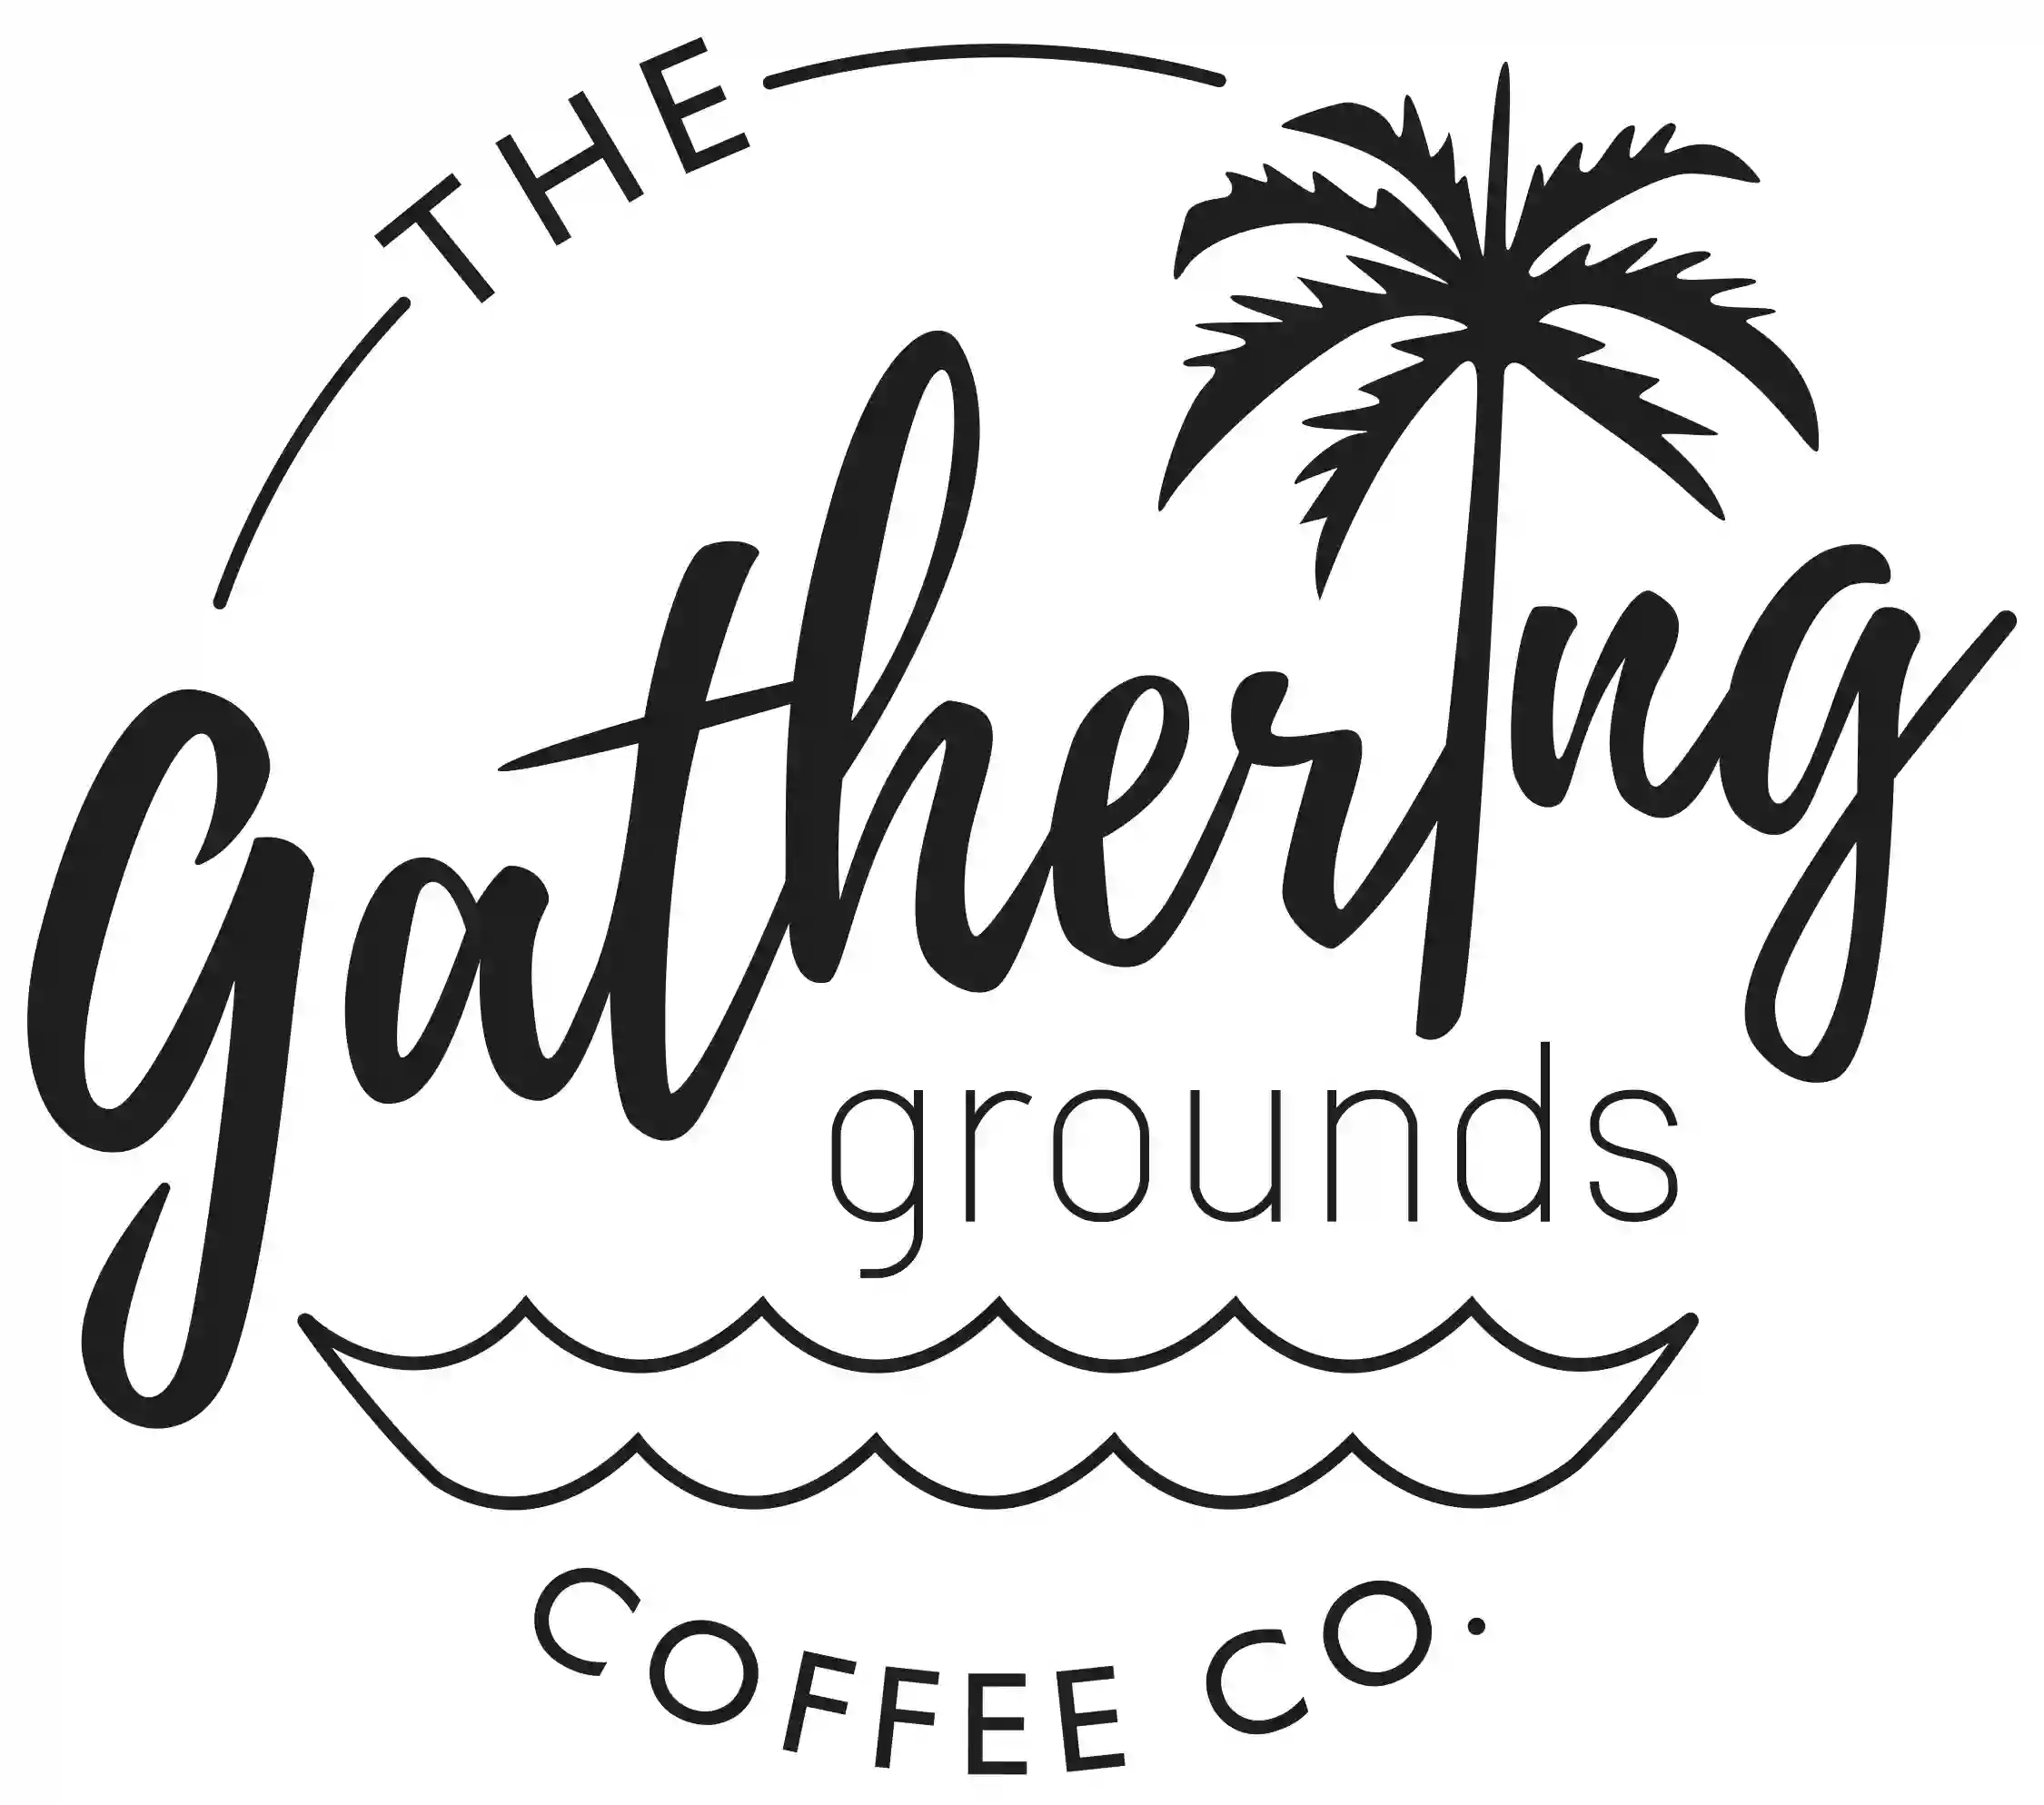 The Gathering Grounds Coffee Co.